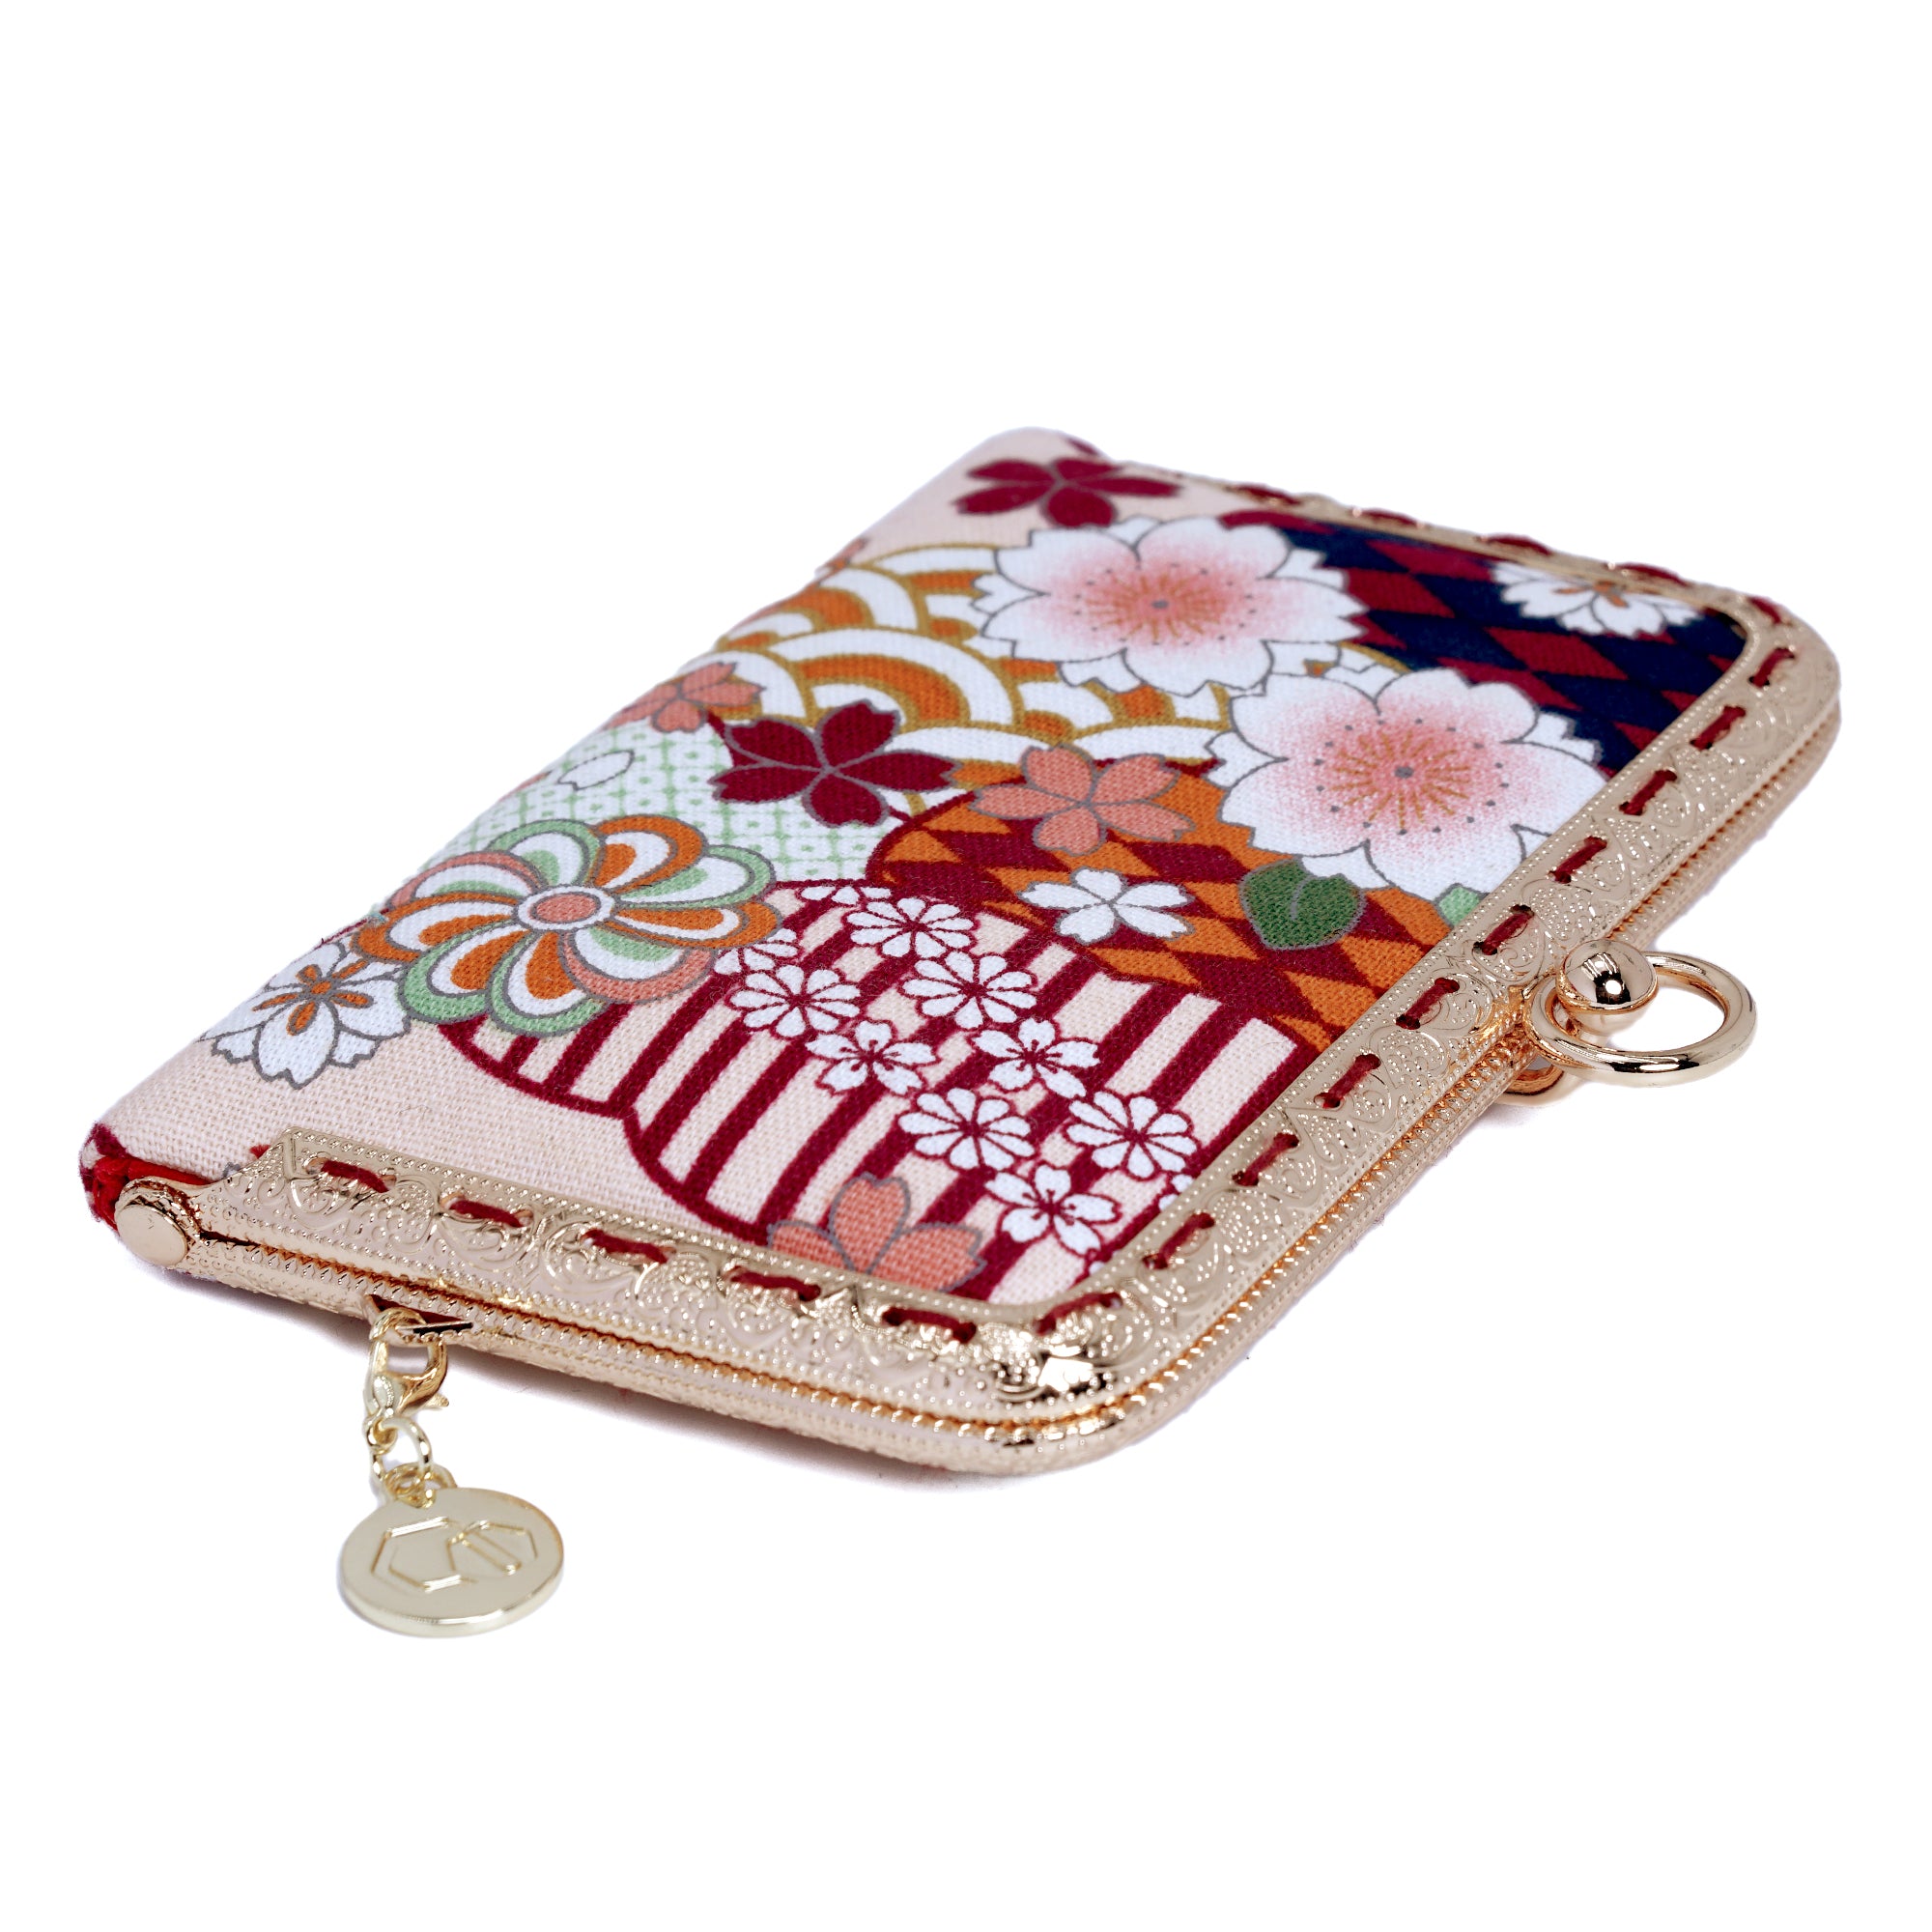 Kiss Clasp Card Holder - Natsume